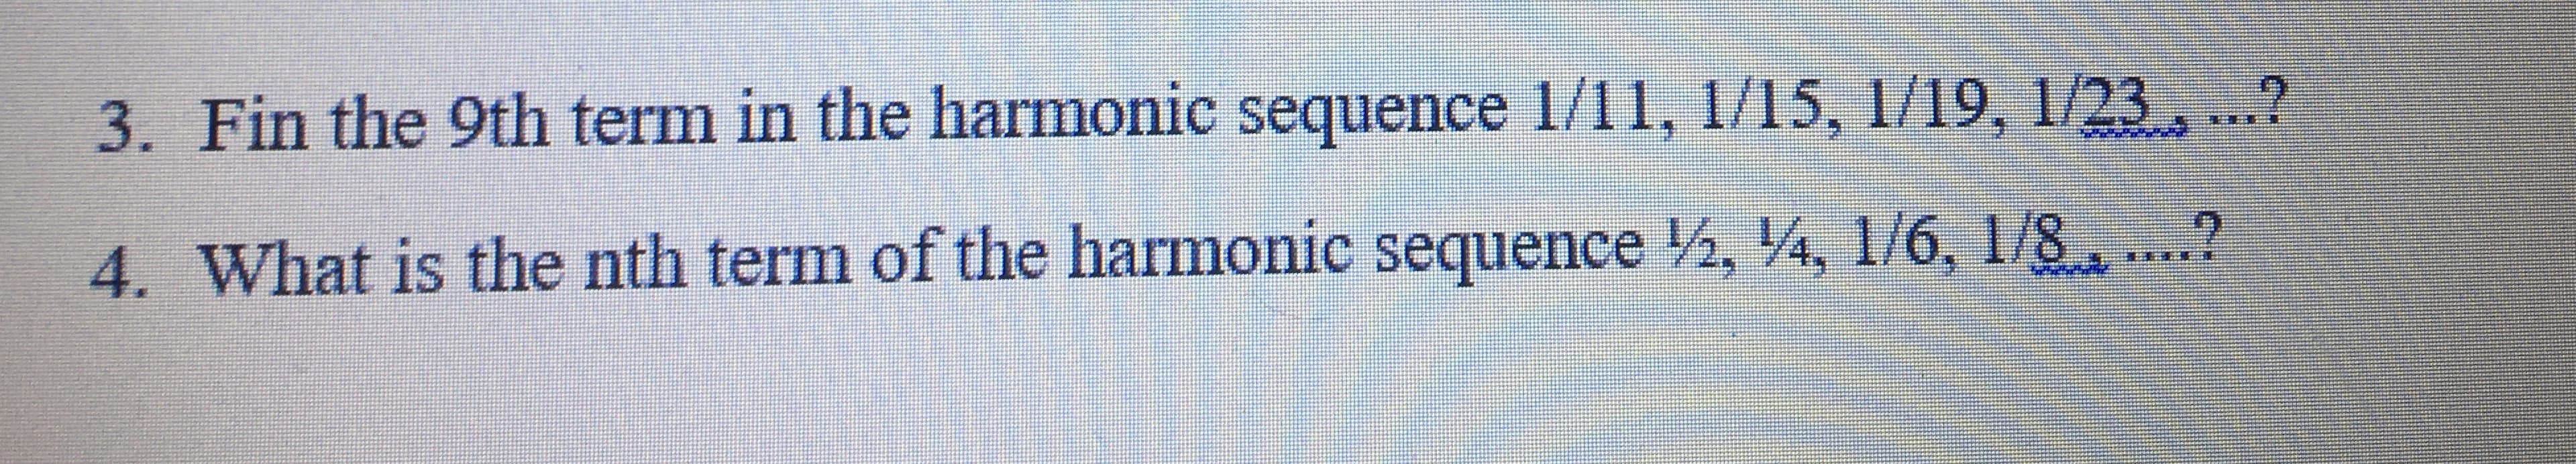 Fin the 9th term in the harmonic sequence 1/11, 1/15, 1/19, 1/23, ..?
What is the nth term of the harmonic sequence 2, 4, 1/6, 1/8 ...?
